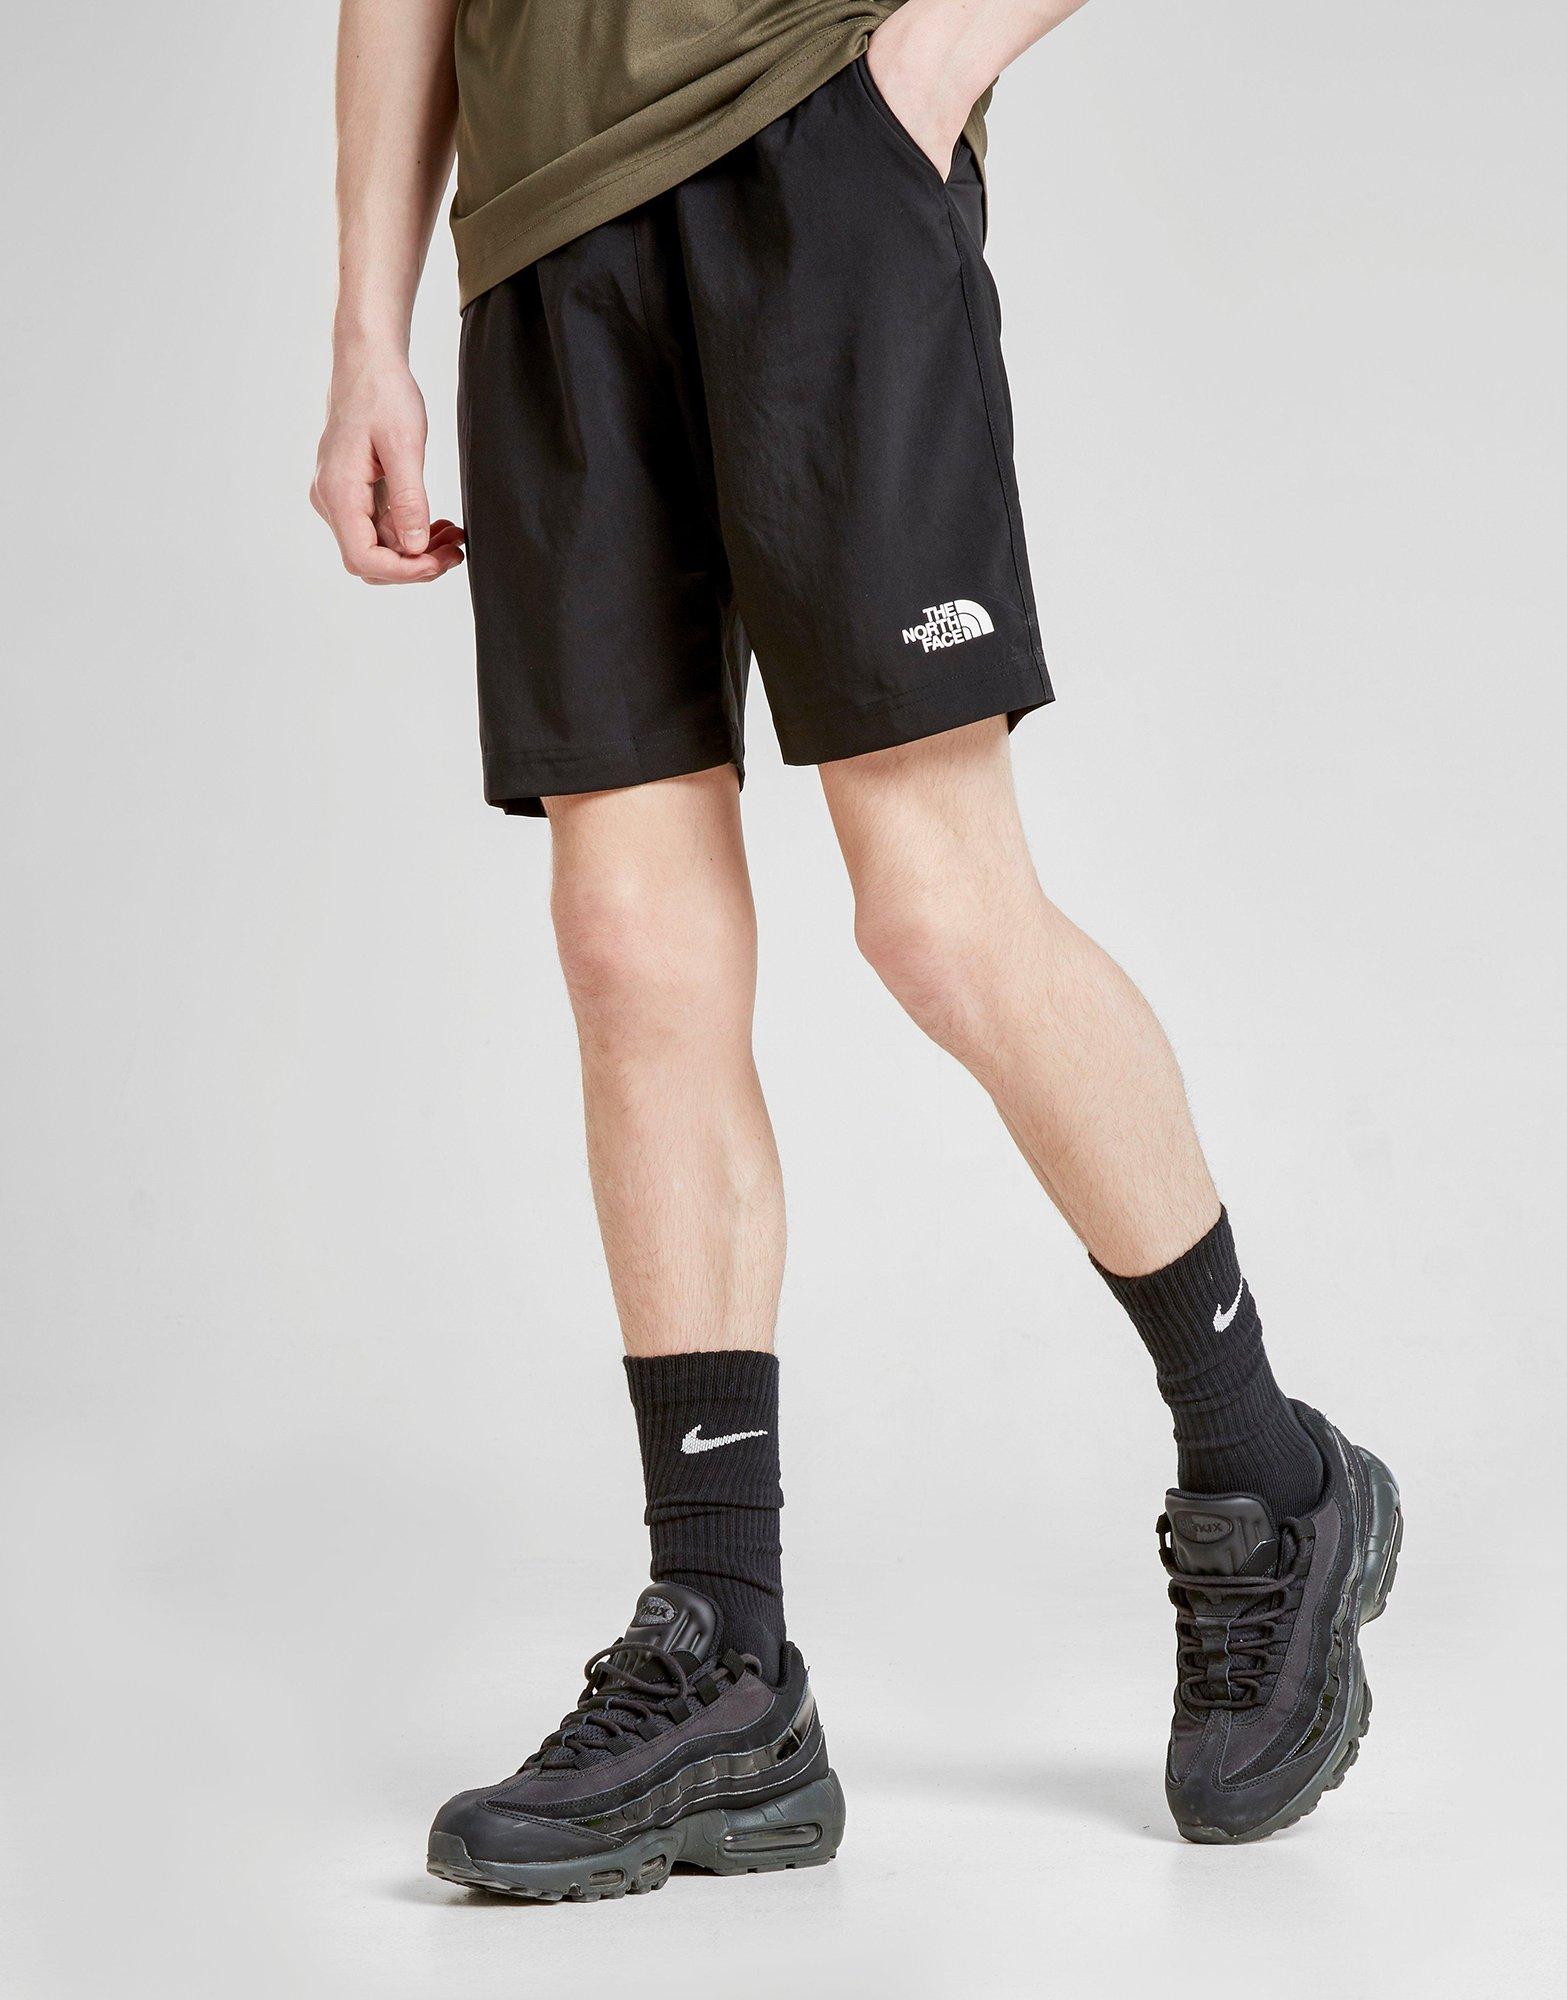 the north face reactor shorts